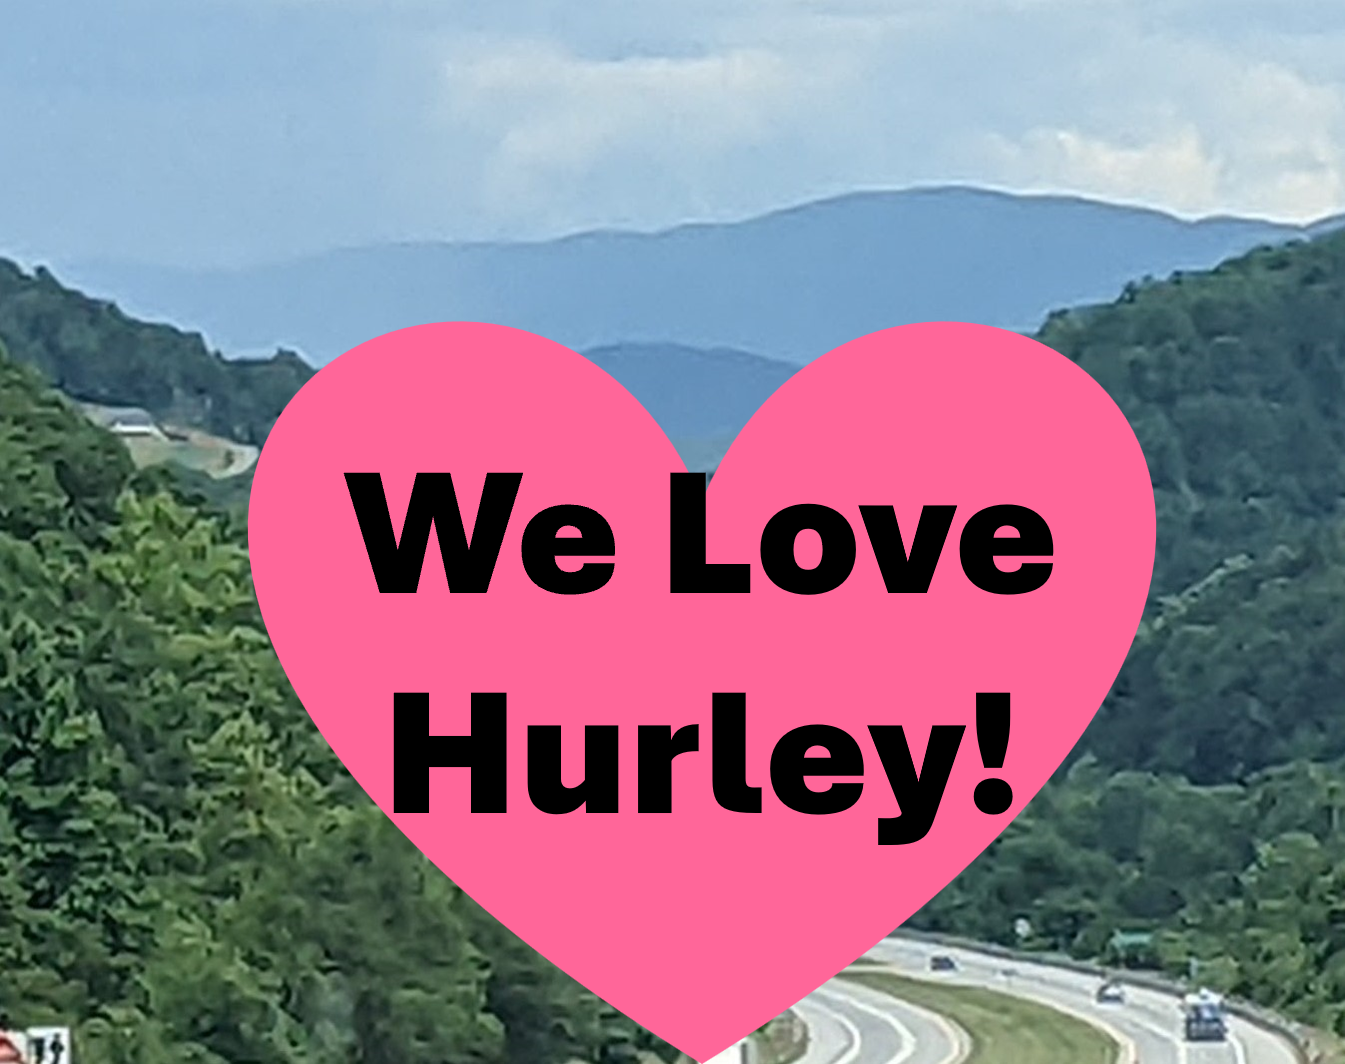 We love Hurley heart on top of mountains